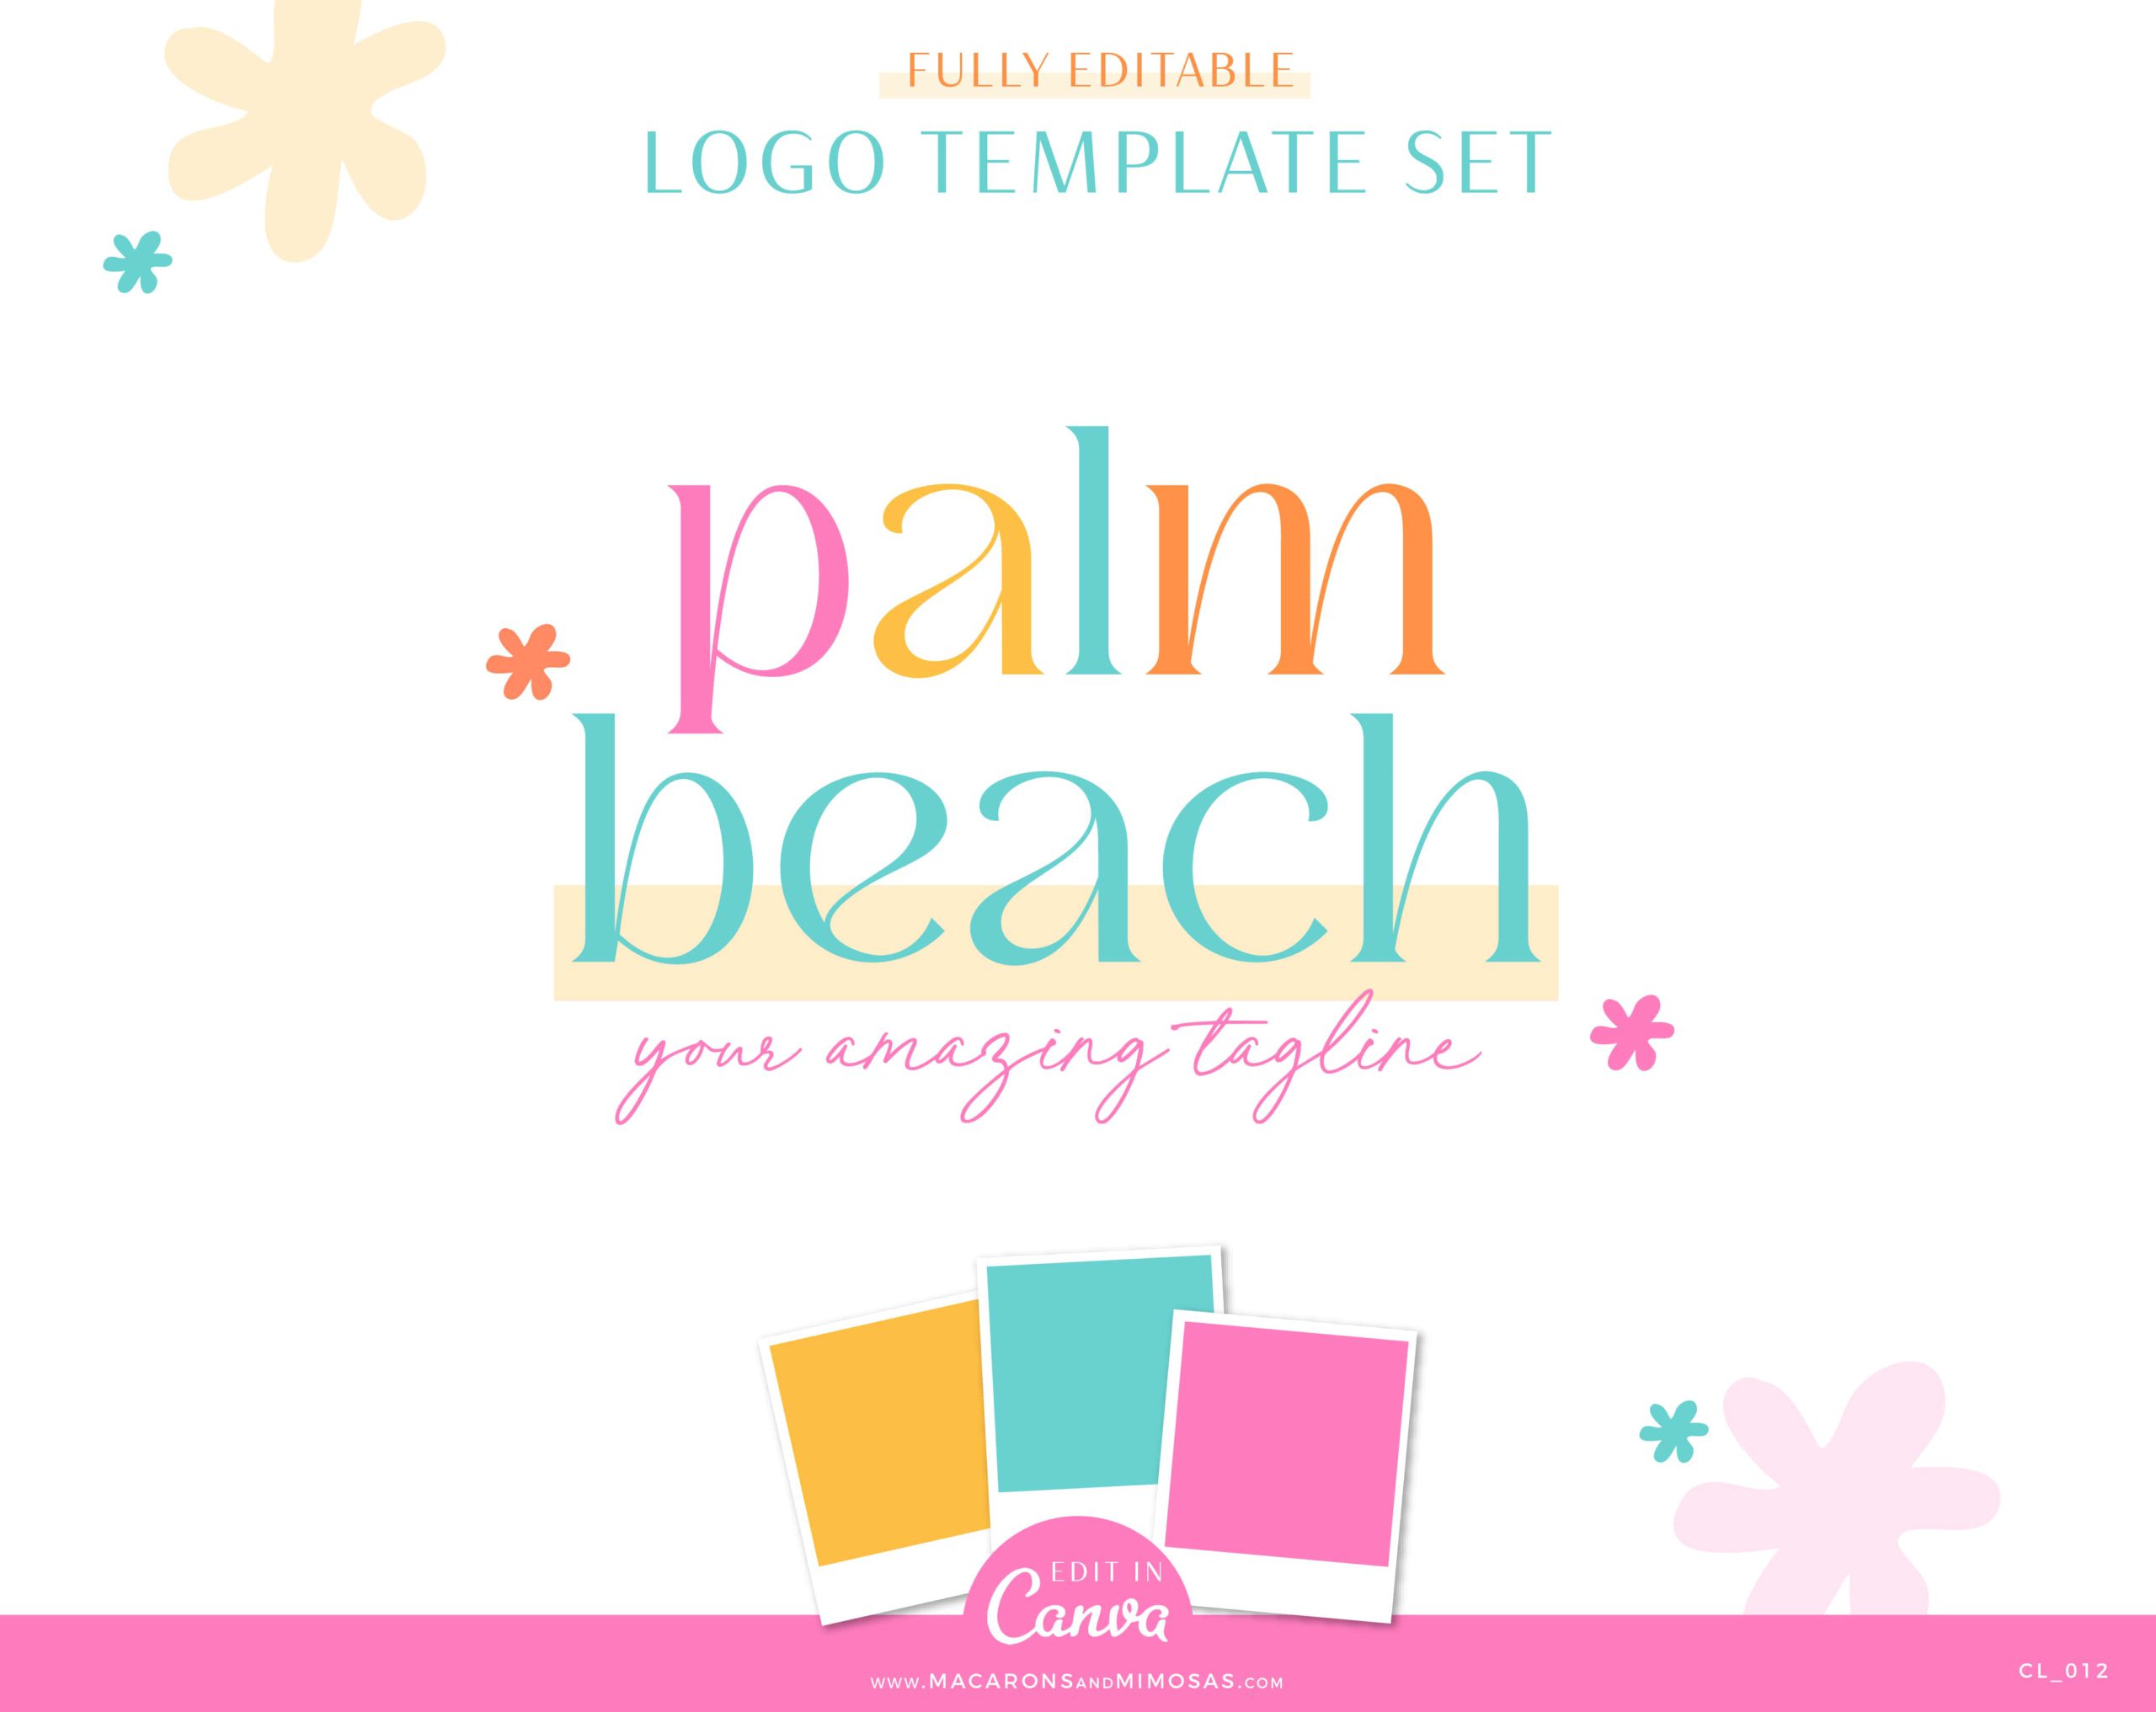 Colorful Canva Logo Template Kit includes one Main Logo, a Secondary Logo, a Brand Board template, Curated Stock Photos suggestions, and more! 